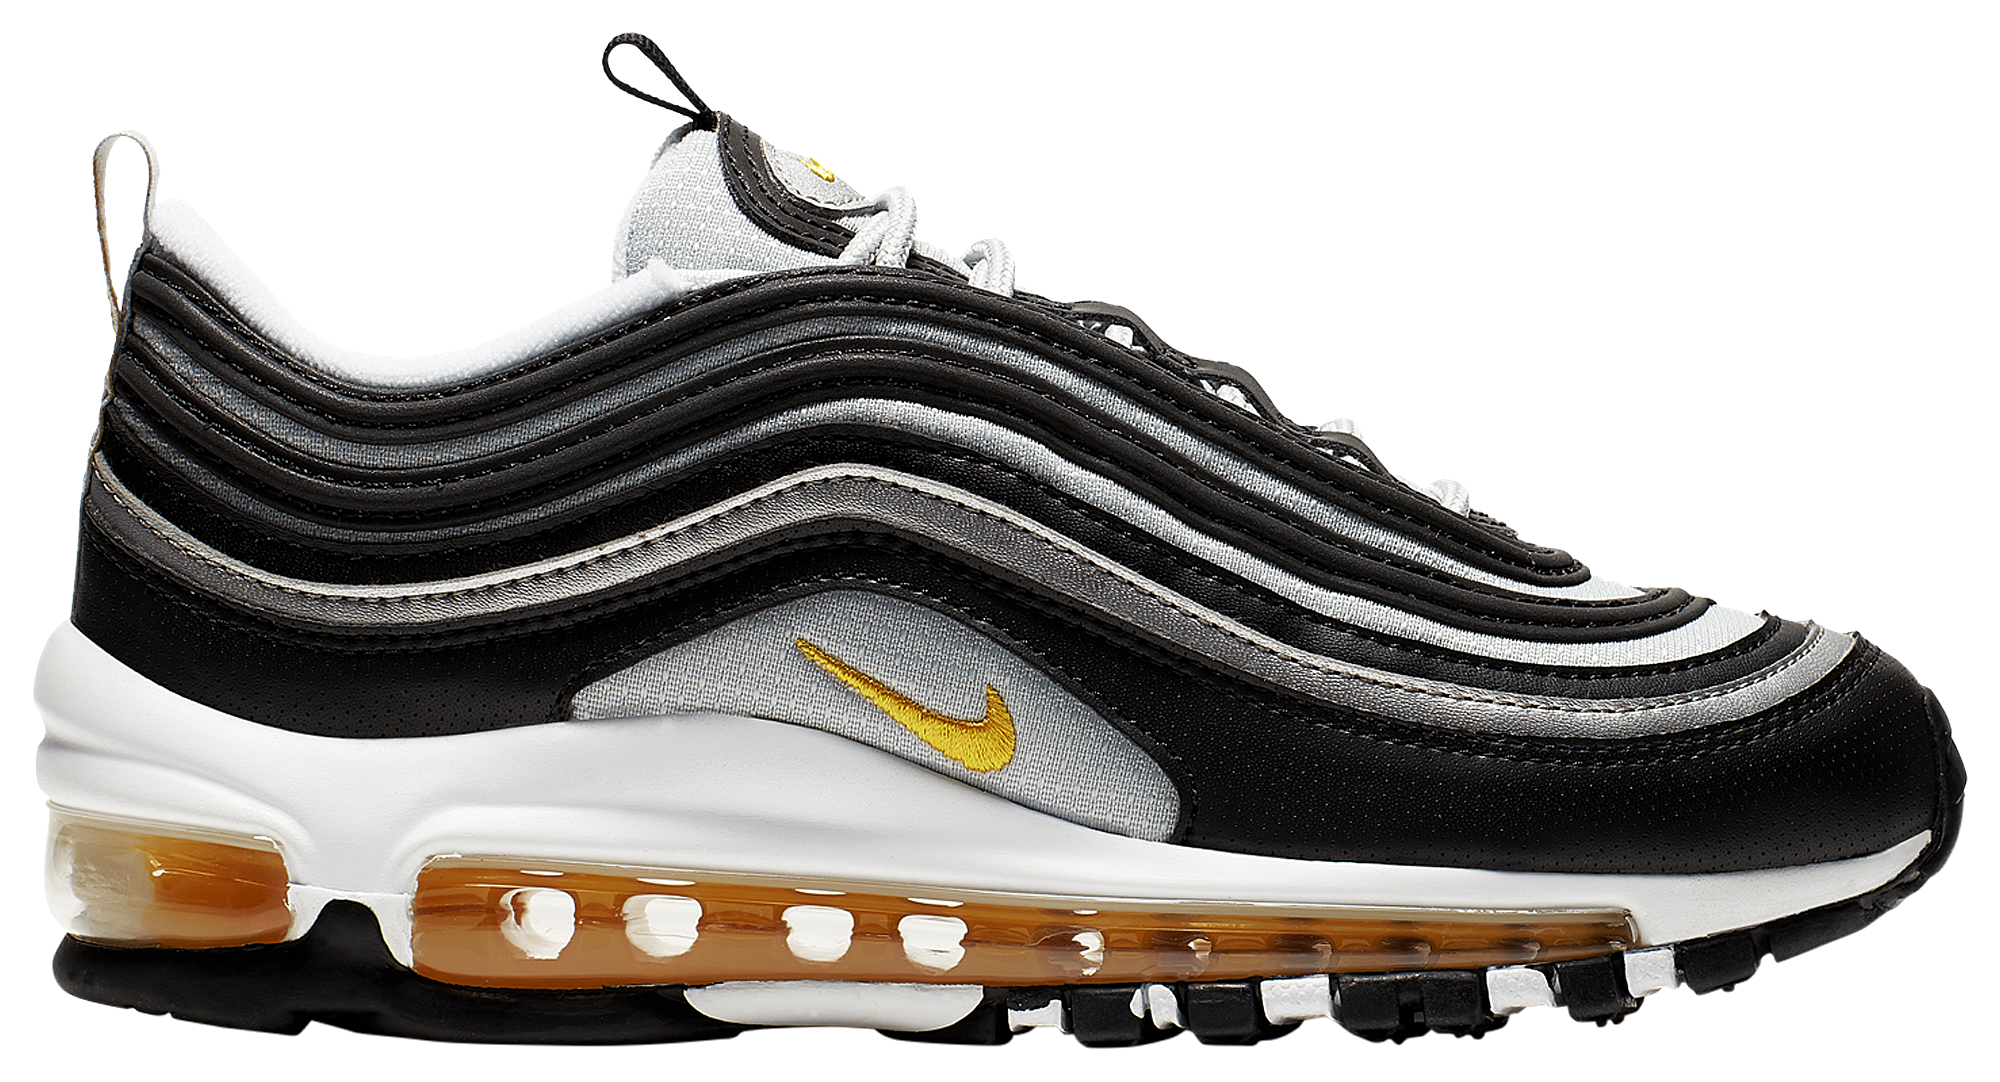 Jastip Jasa Titip on Nike Vapormax 97 Gold available